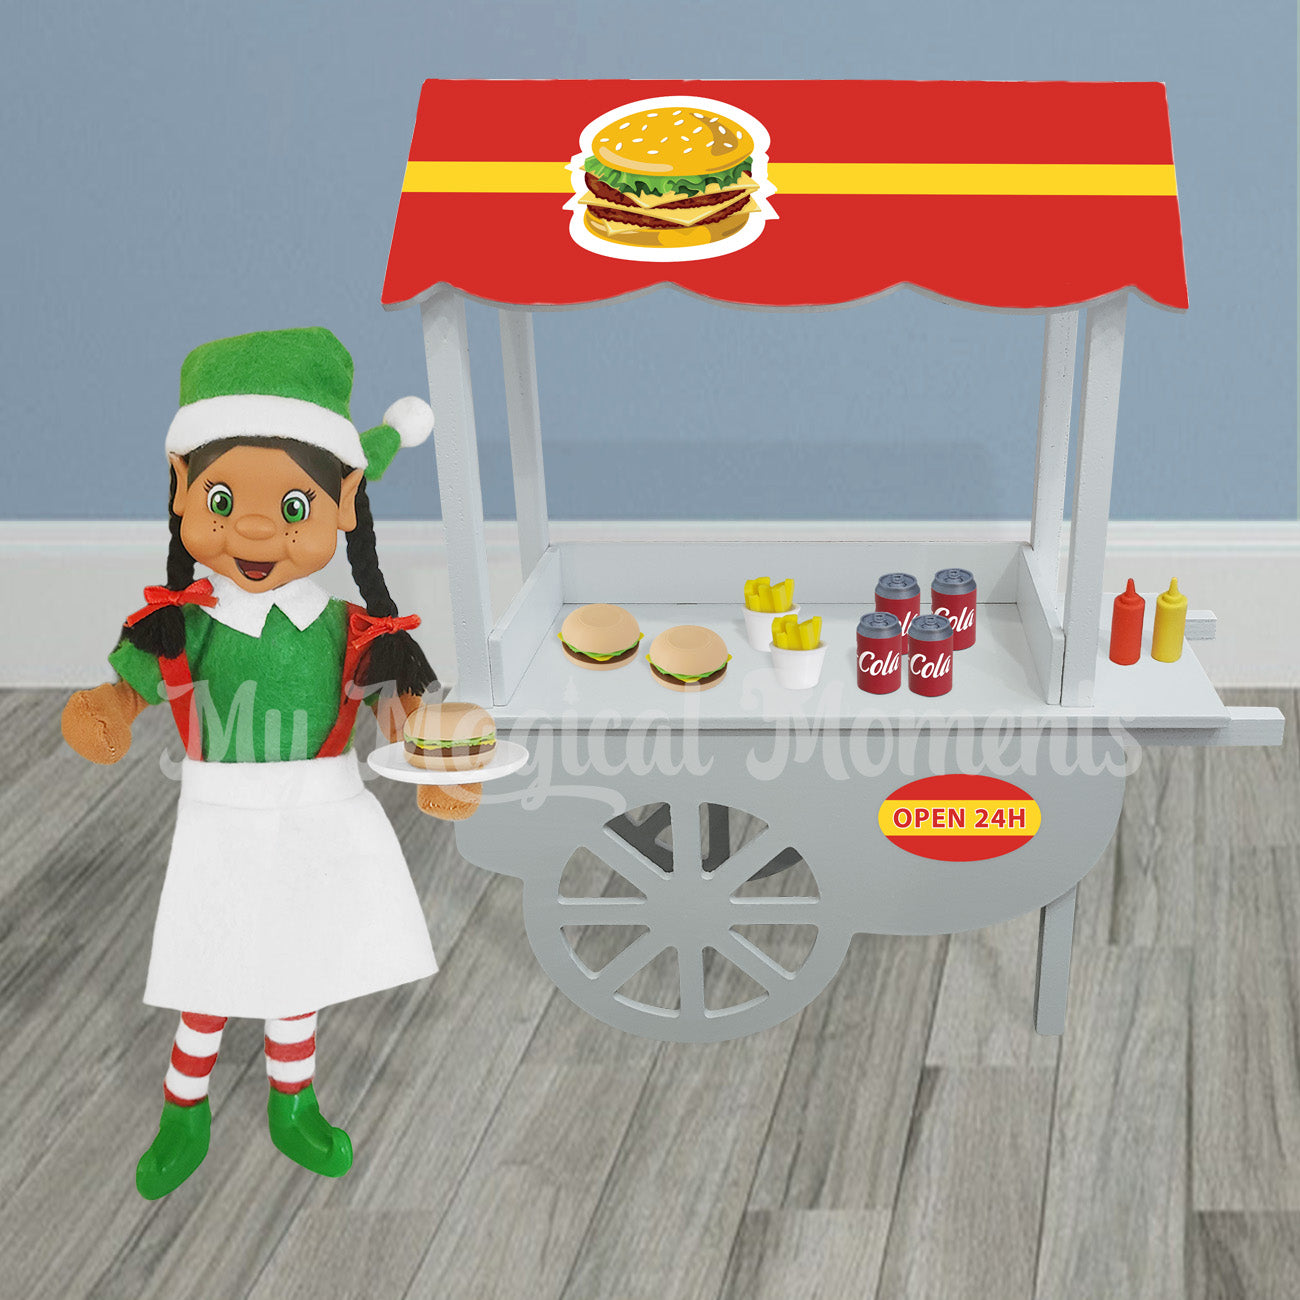 Elf serving a burger in front of a fast food service shop.